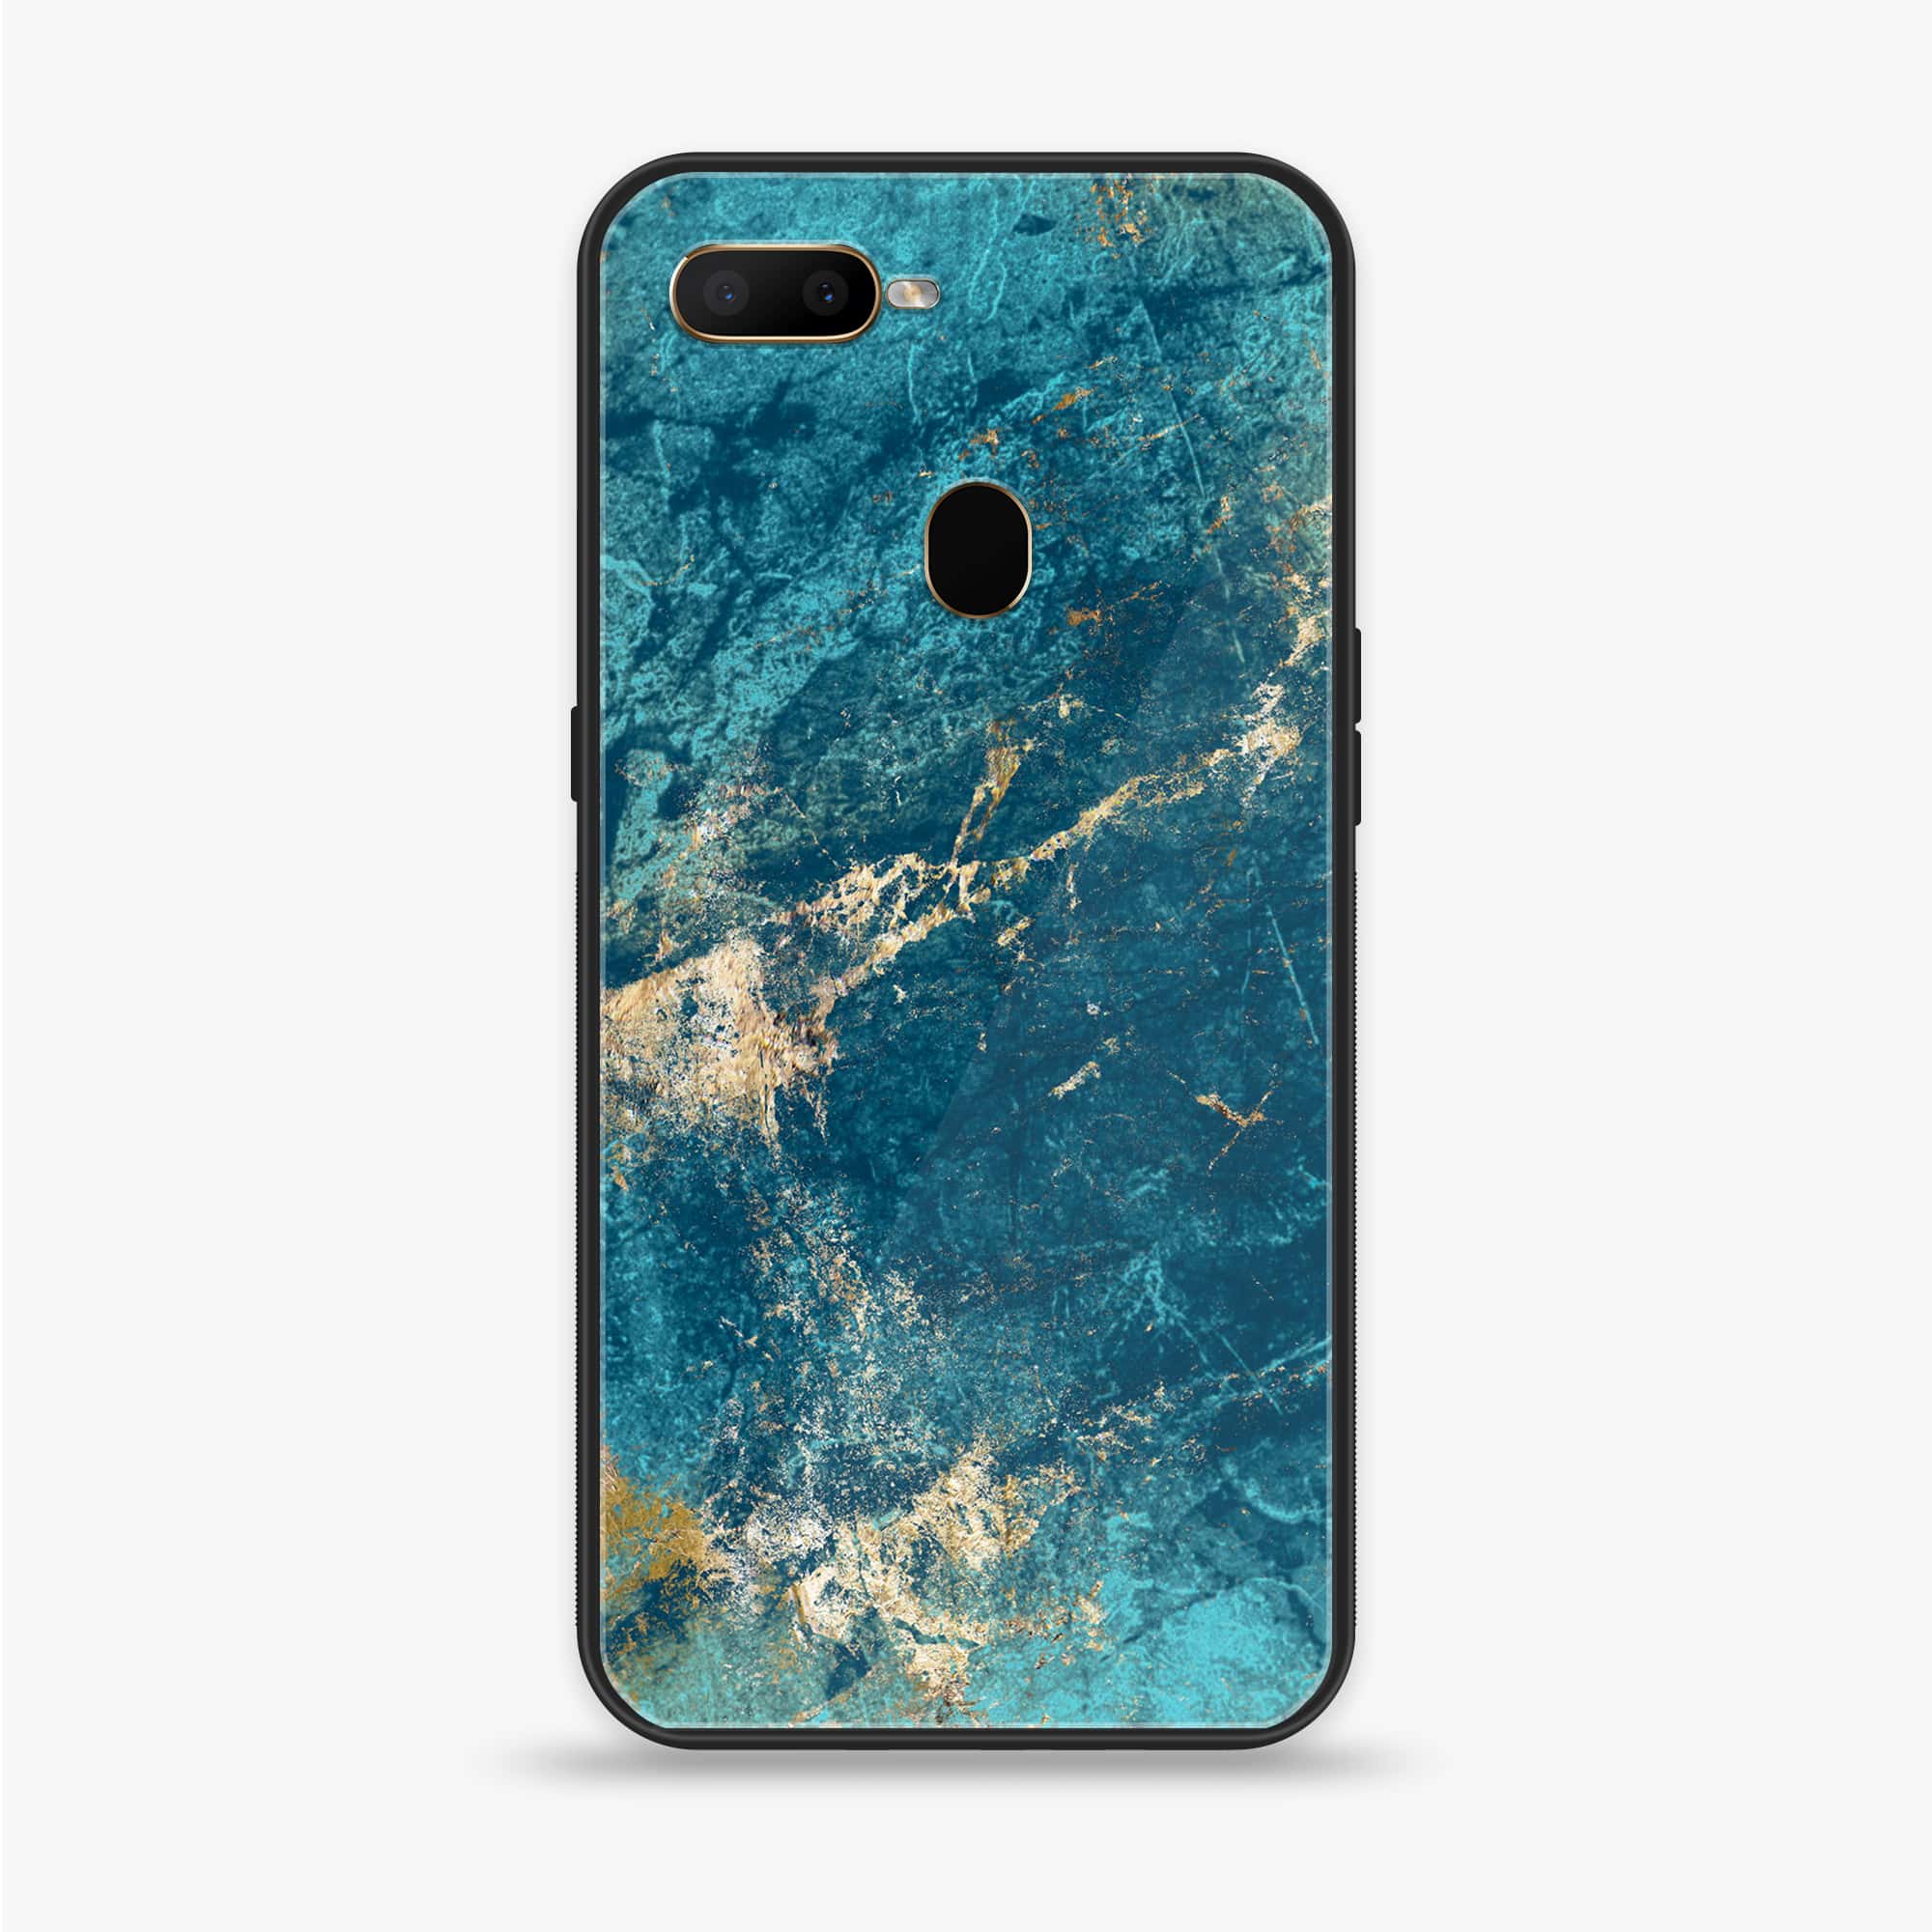 Oppo A7 - Blue Marble Series V 2.0 - Premium Printed Glass soft Bumper shock Proof Case